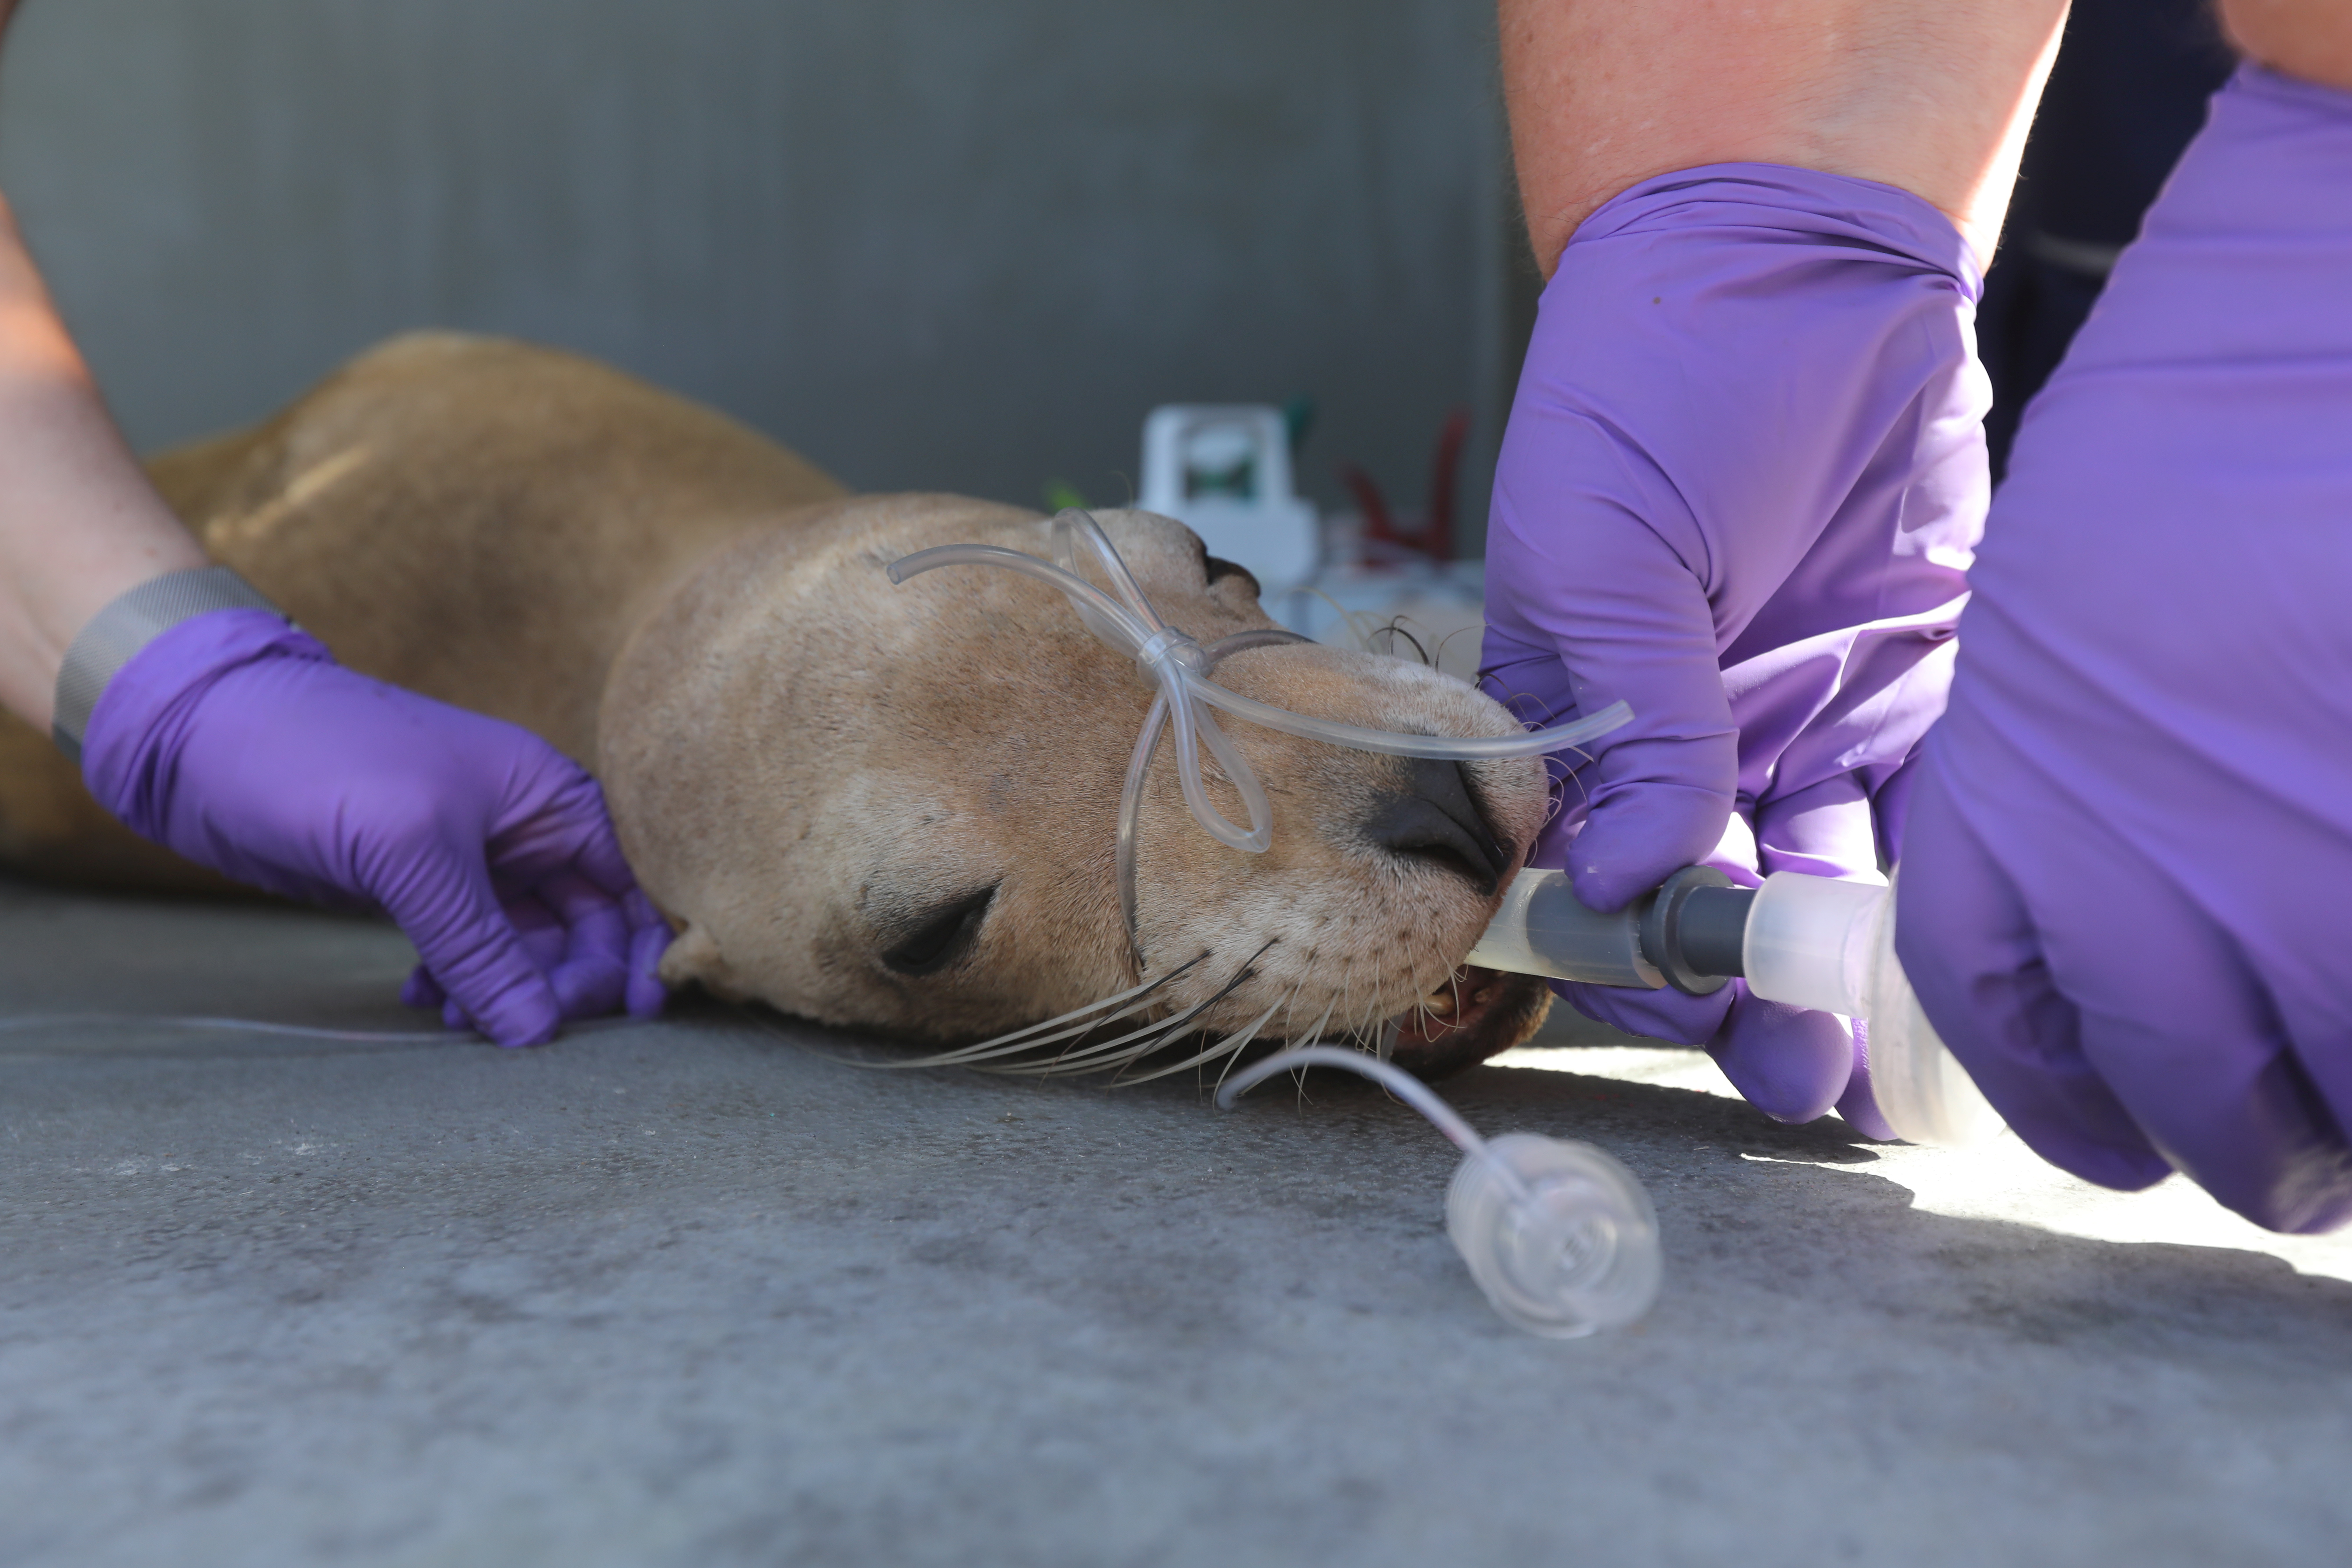 Dr. Cara Field, medical director at the Marine Mammal Center, removes tubes from a California sea lion in Sausalito